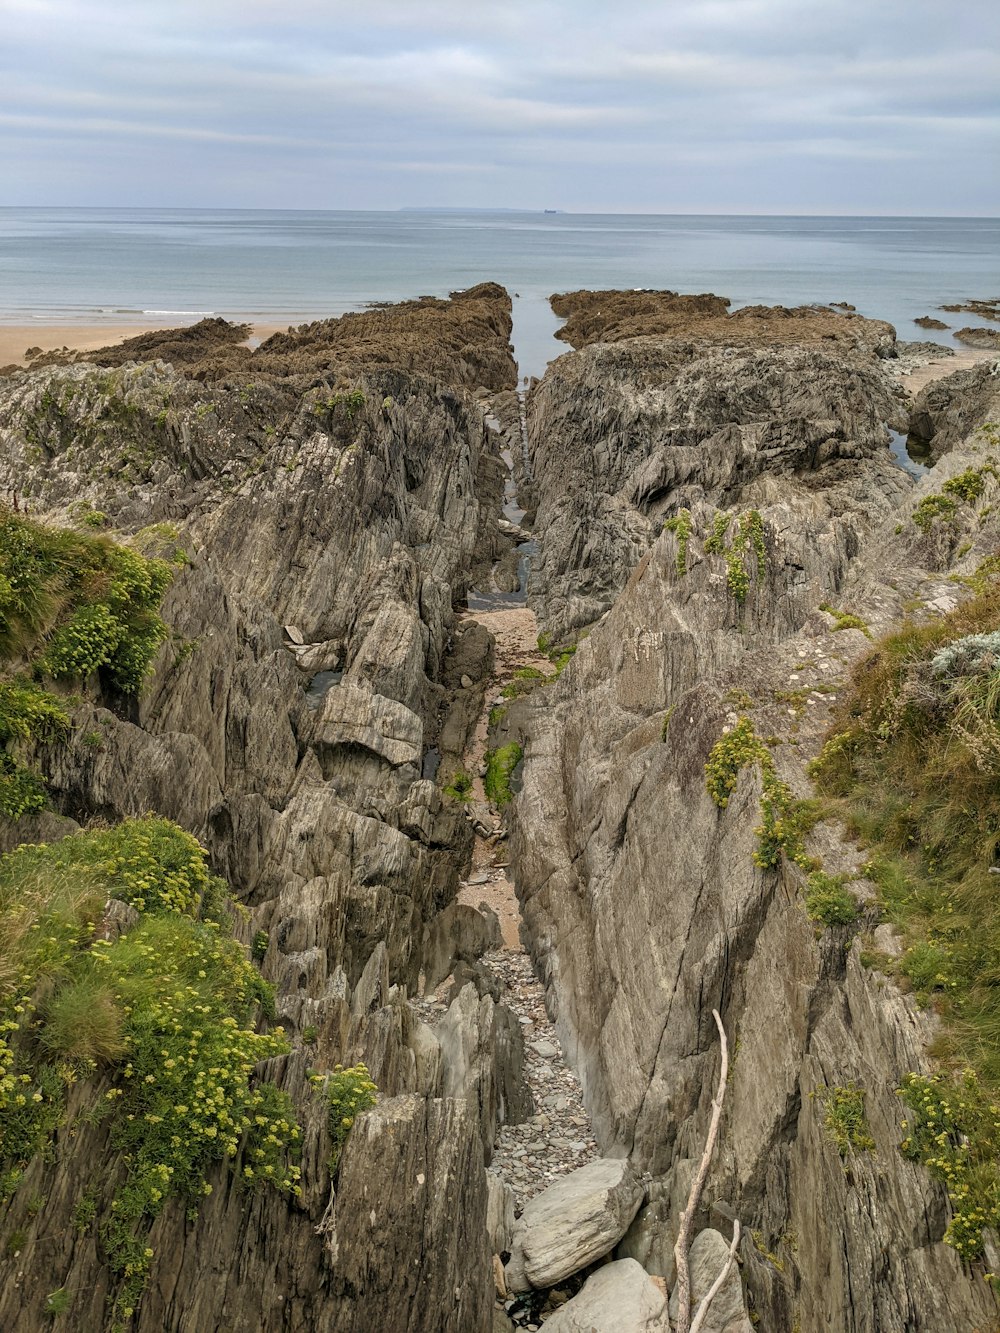 a view of a rocky cliff with a body of water in the distance